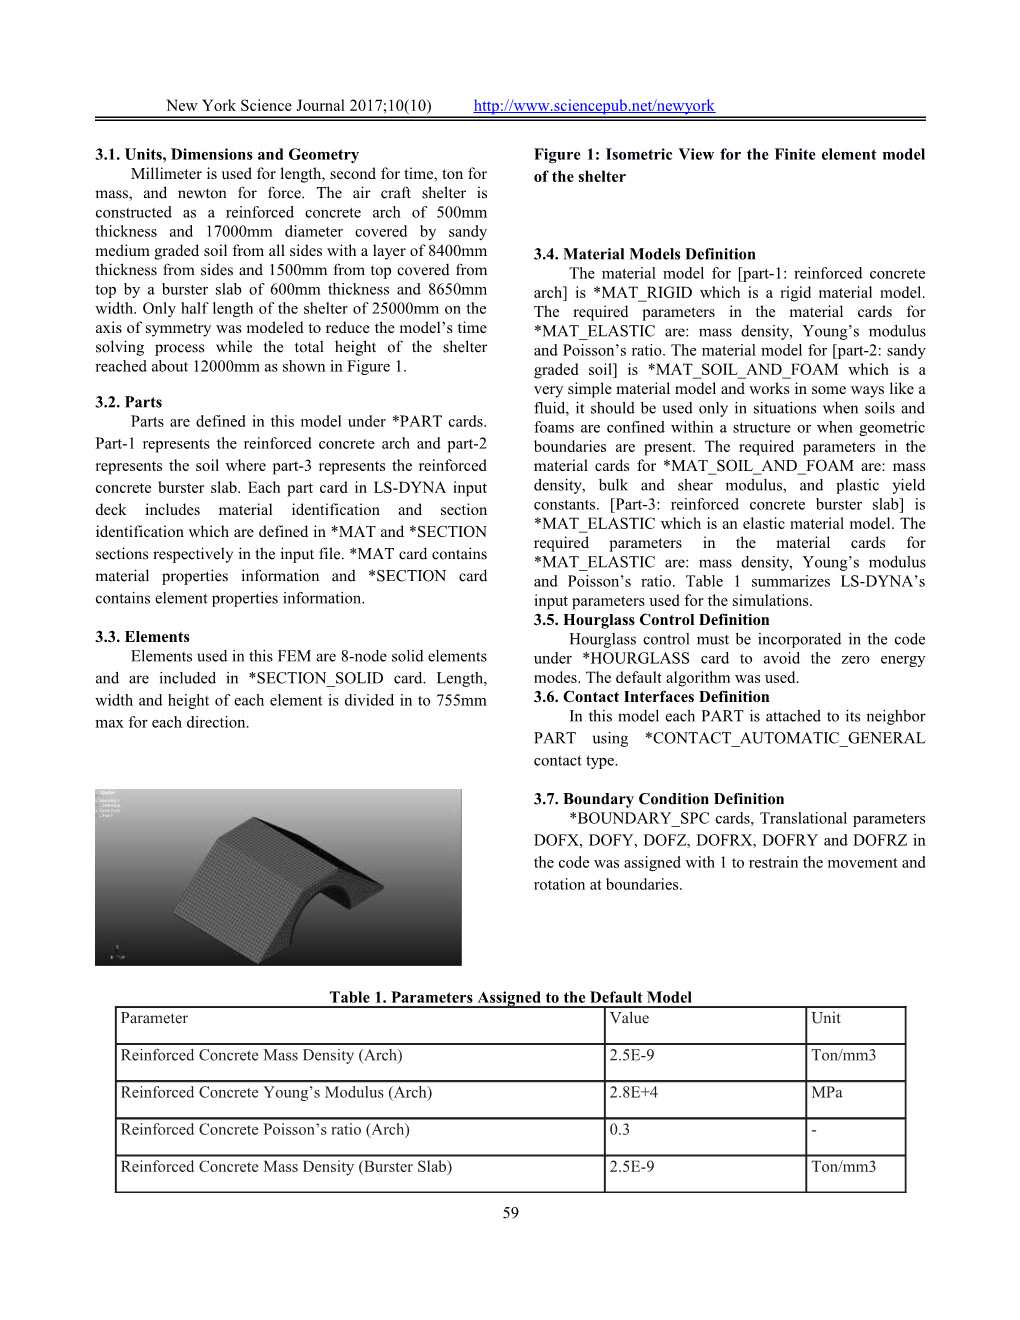 Nonlinear Dynamic Finite Element Analysis of Hardened Aircraft Shelter Subjected to Blast Load